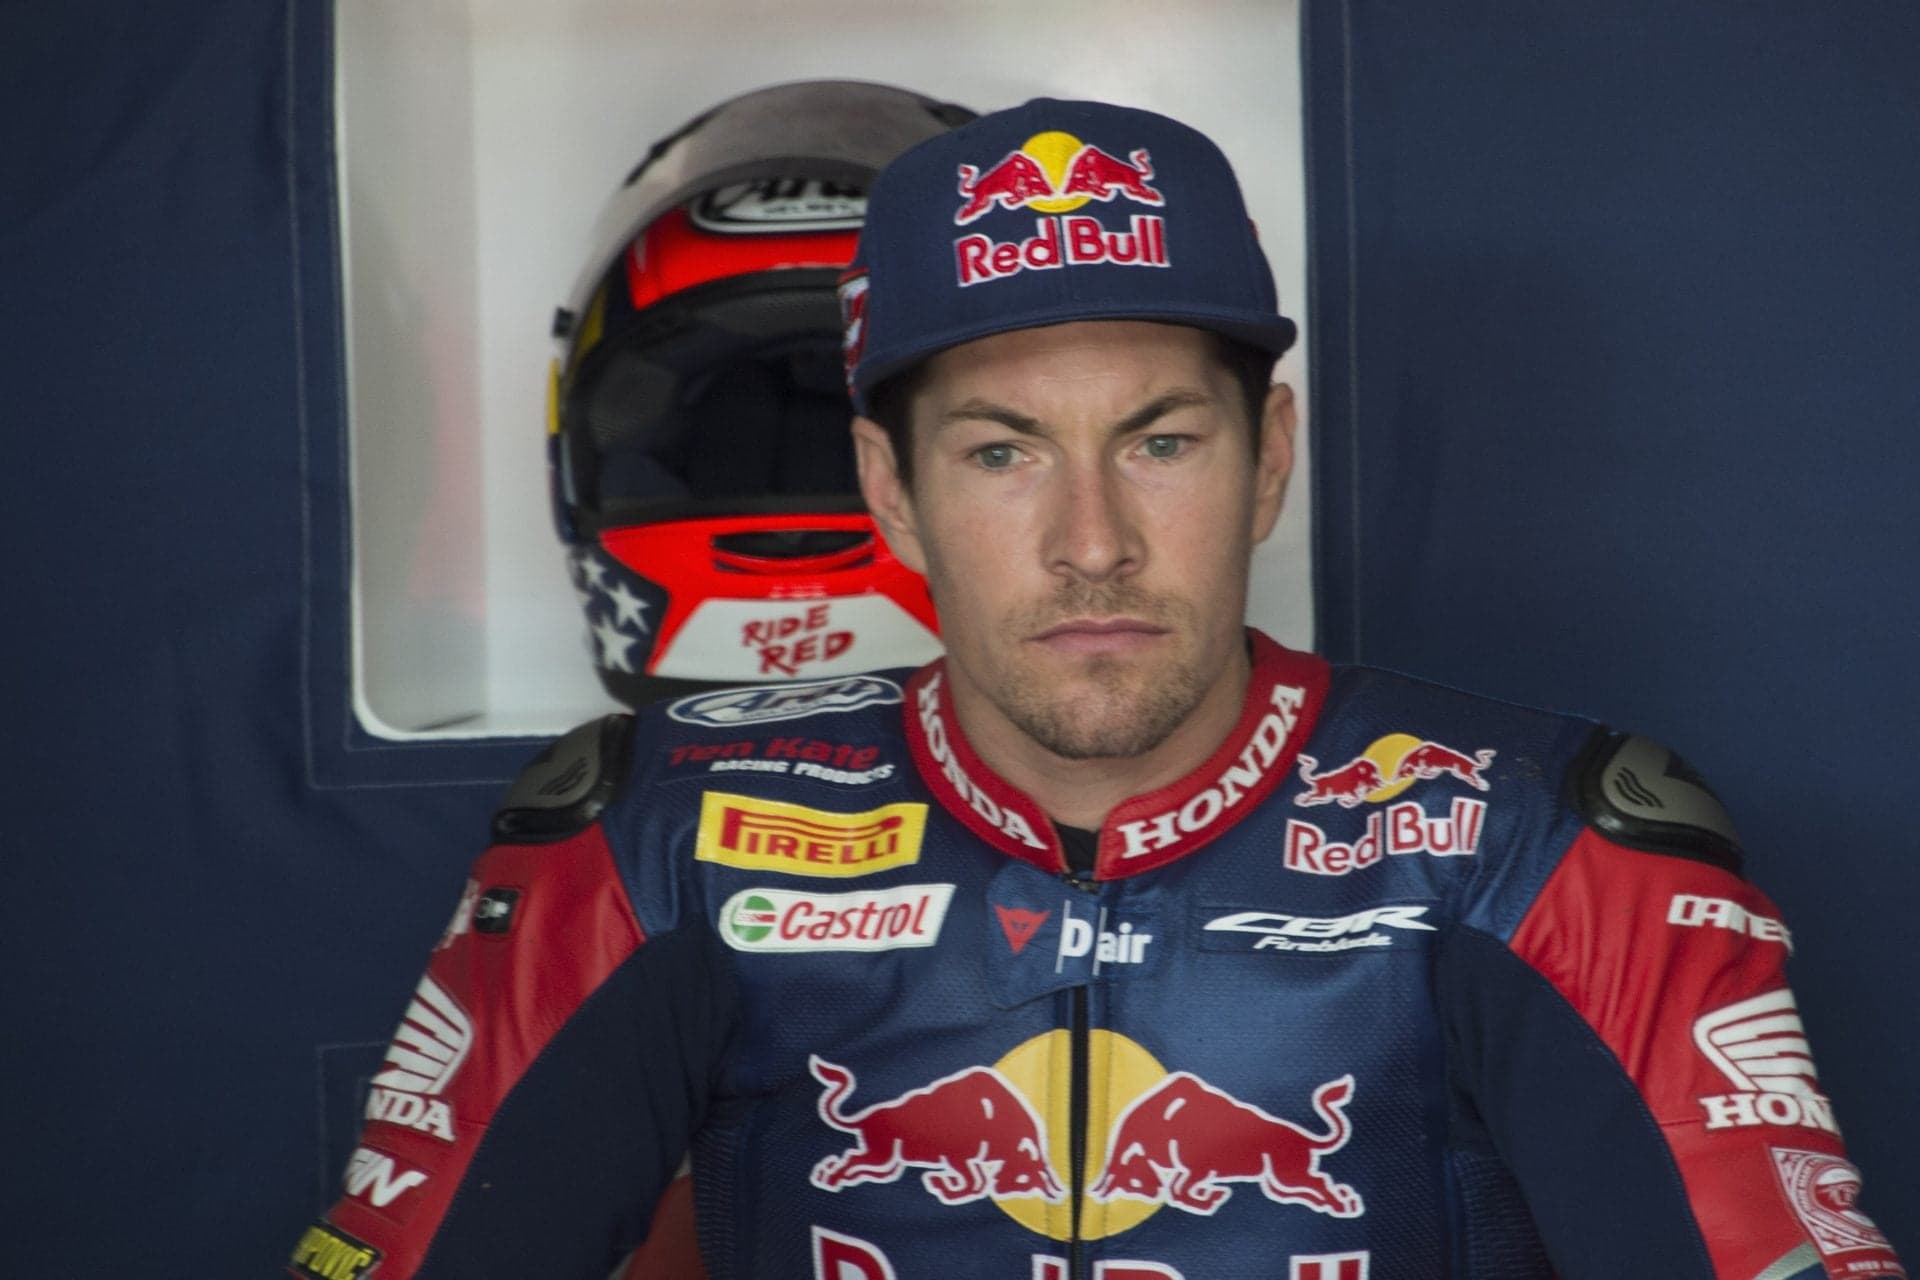 MotoGP Champ Nicky Hayden Seriously Injured in Cycling Accident